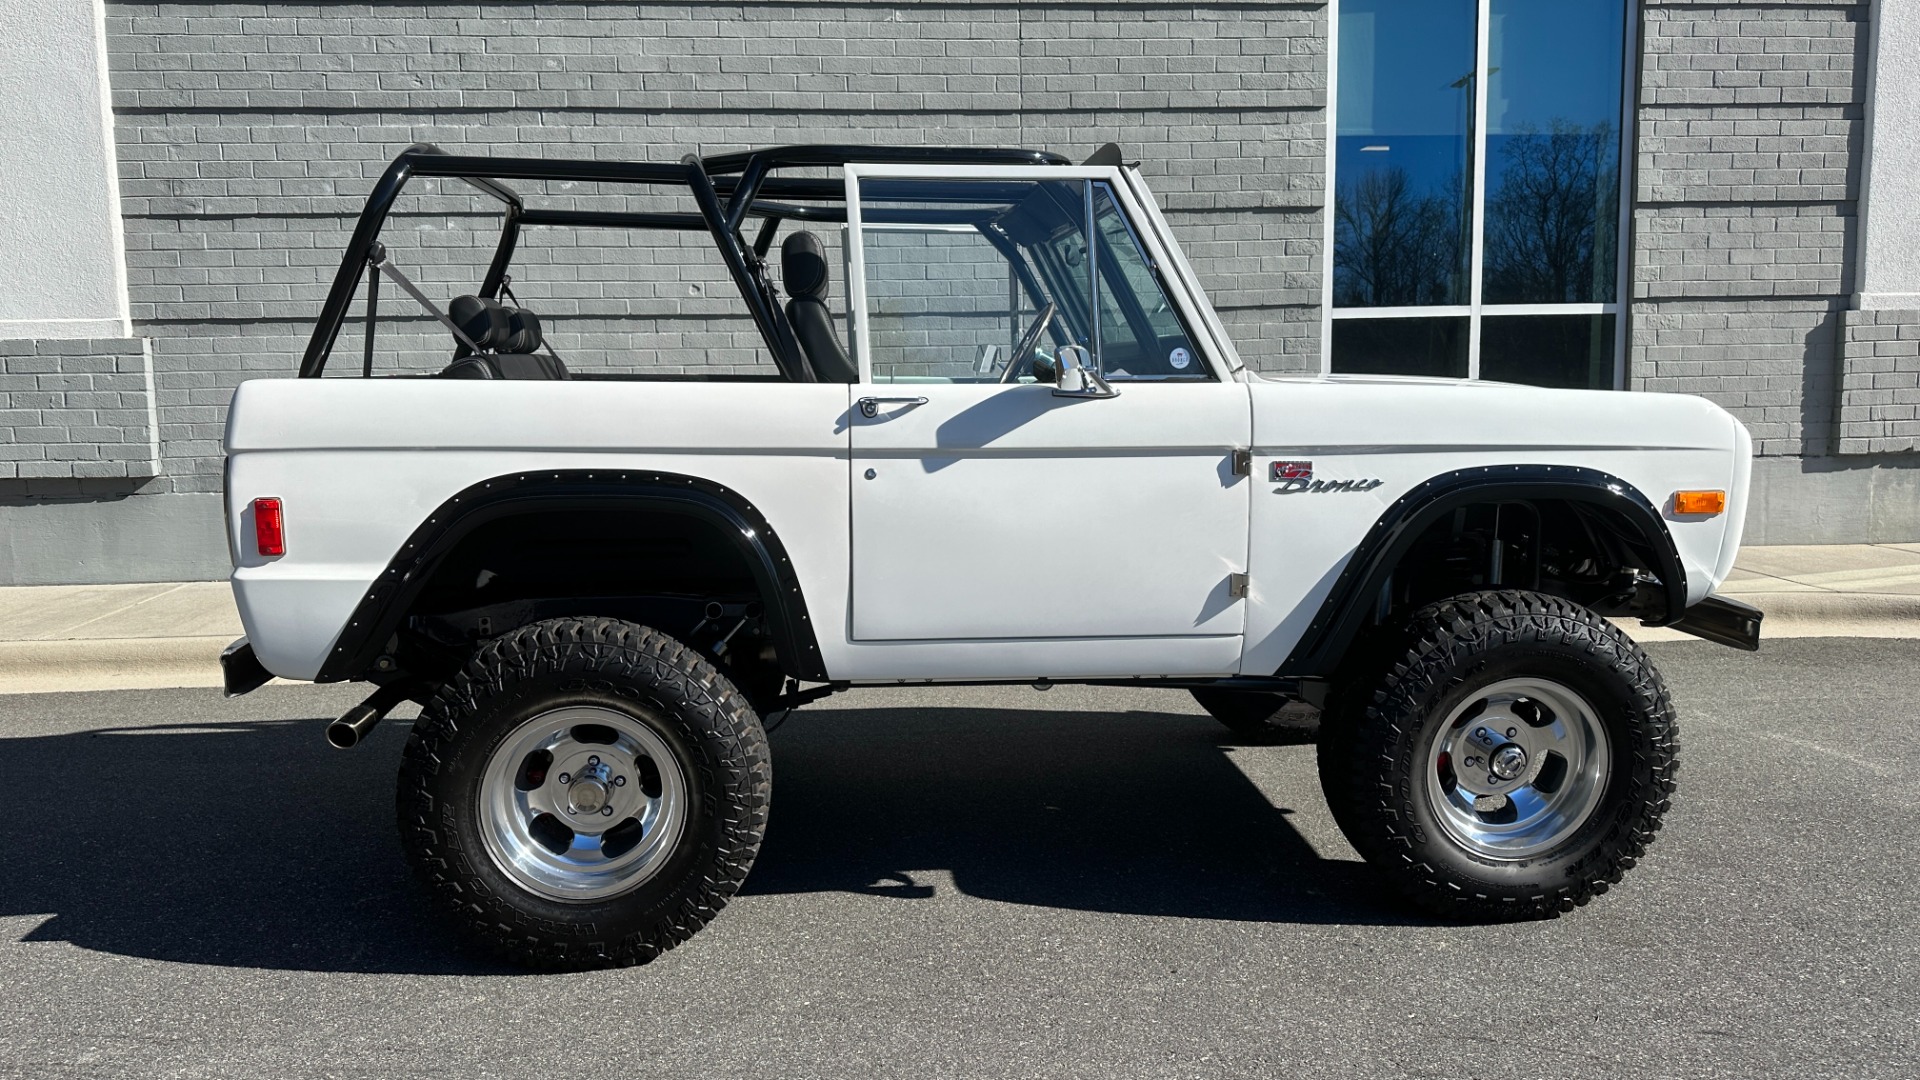 Used 1977 Ford Bronco GATEWAY EDITION / 5.0L COYOTE V8 / FRAME OFF RESTORATION / LEATHER / A/C for sale $225,000 at Formula Imports in Charlotte NC 28227 3